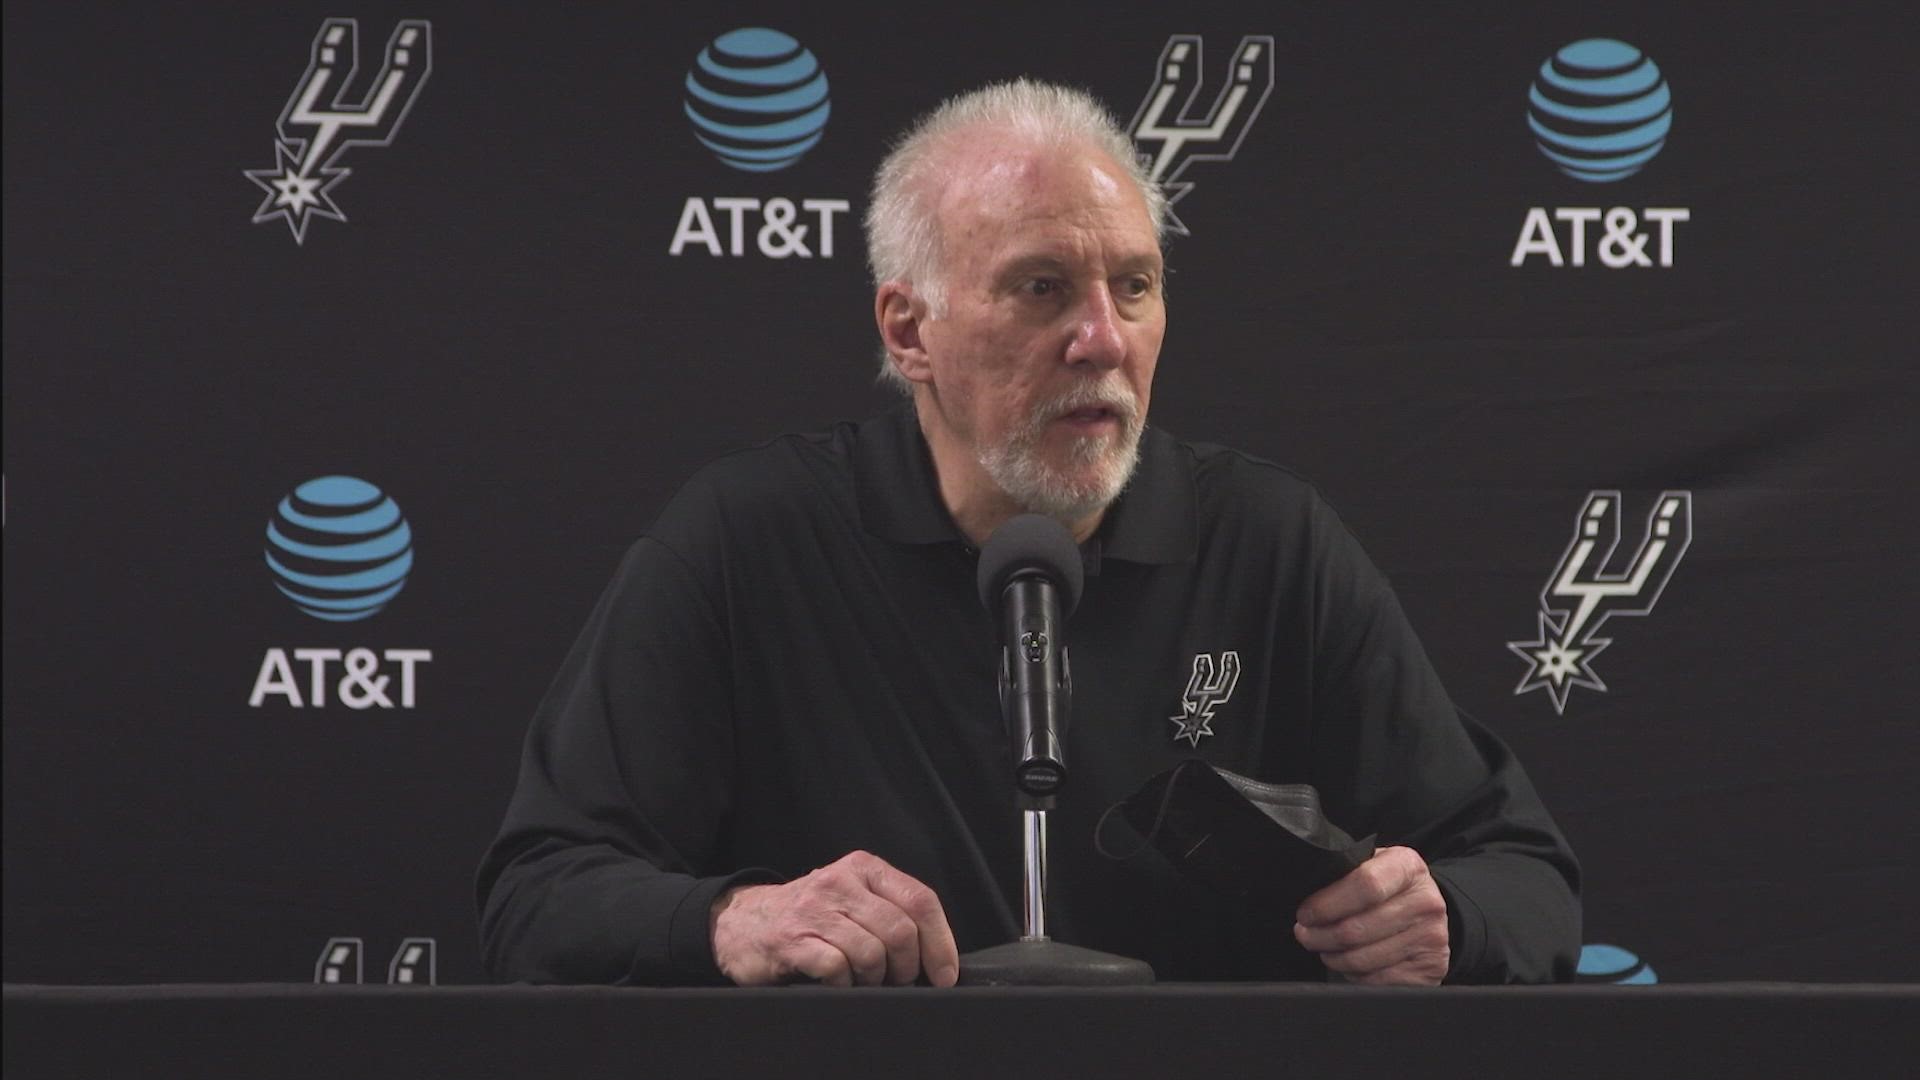 Popovich said the Spurs dug themselves a hole by giving up 39 points in the first quarter, and said Dejounte Murray was amazing in the loss.